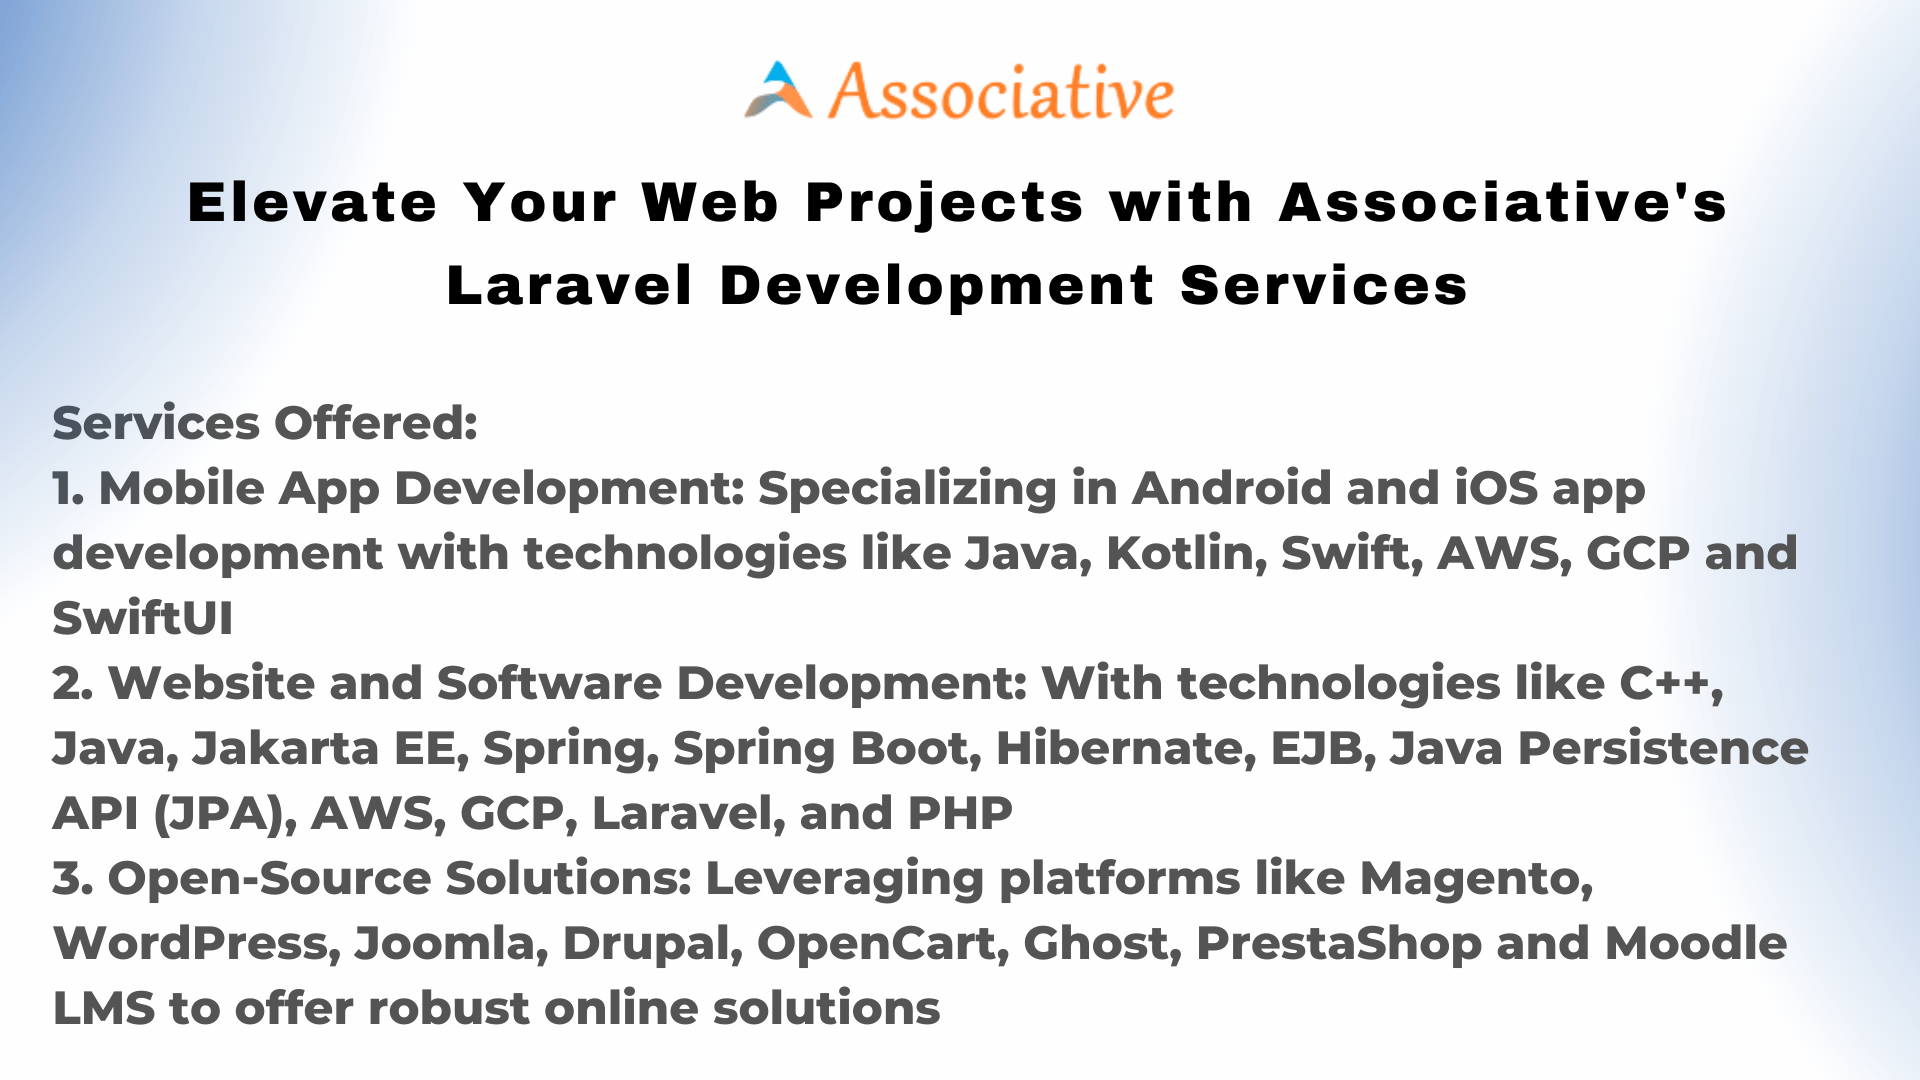 Elevate Your Web Projects with Associative's Laravel Development Services